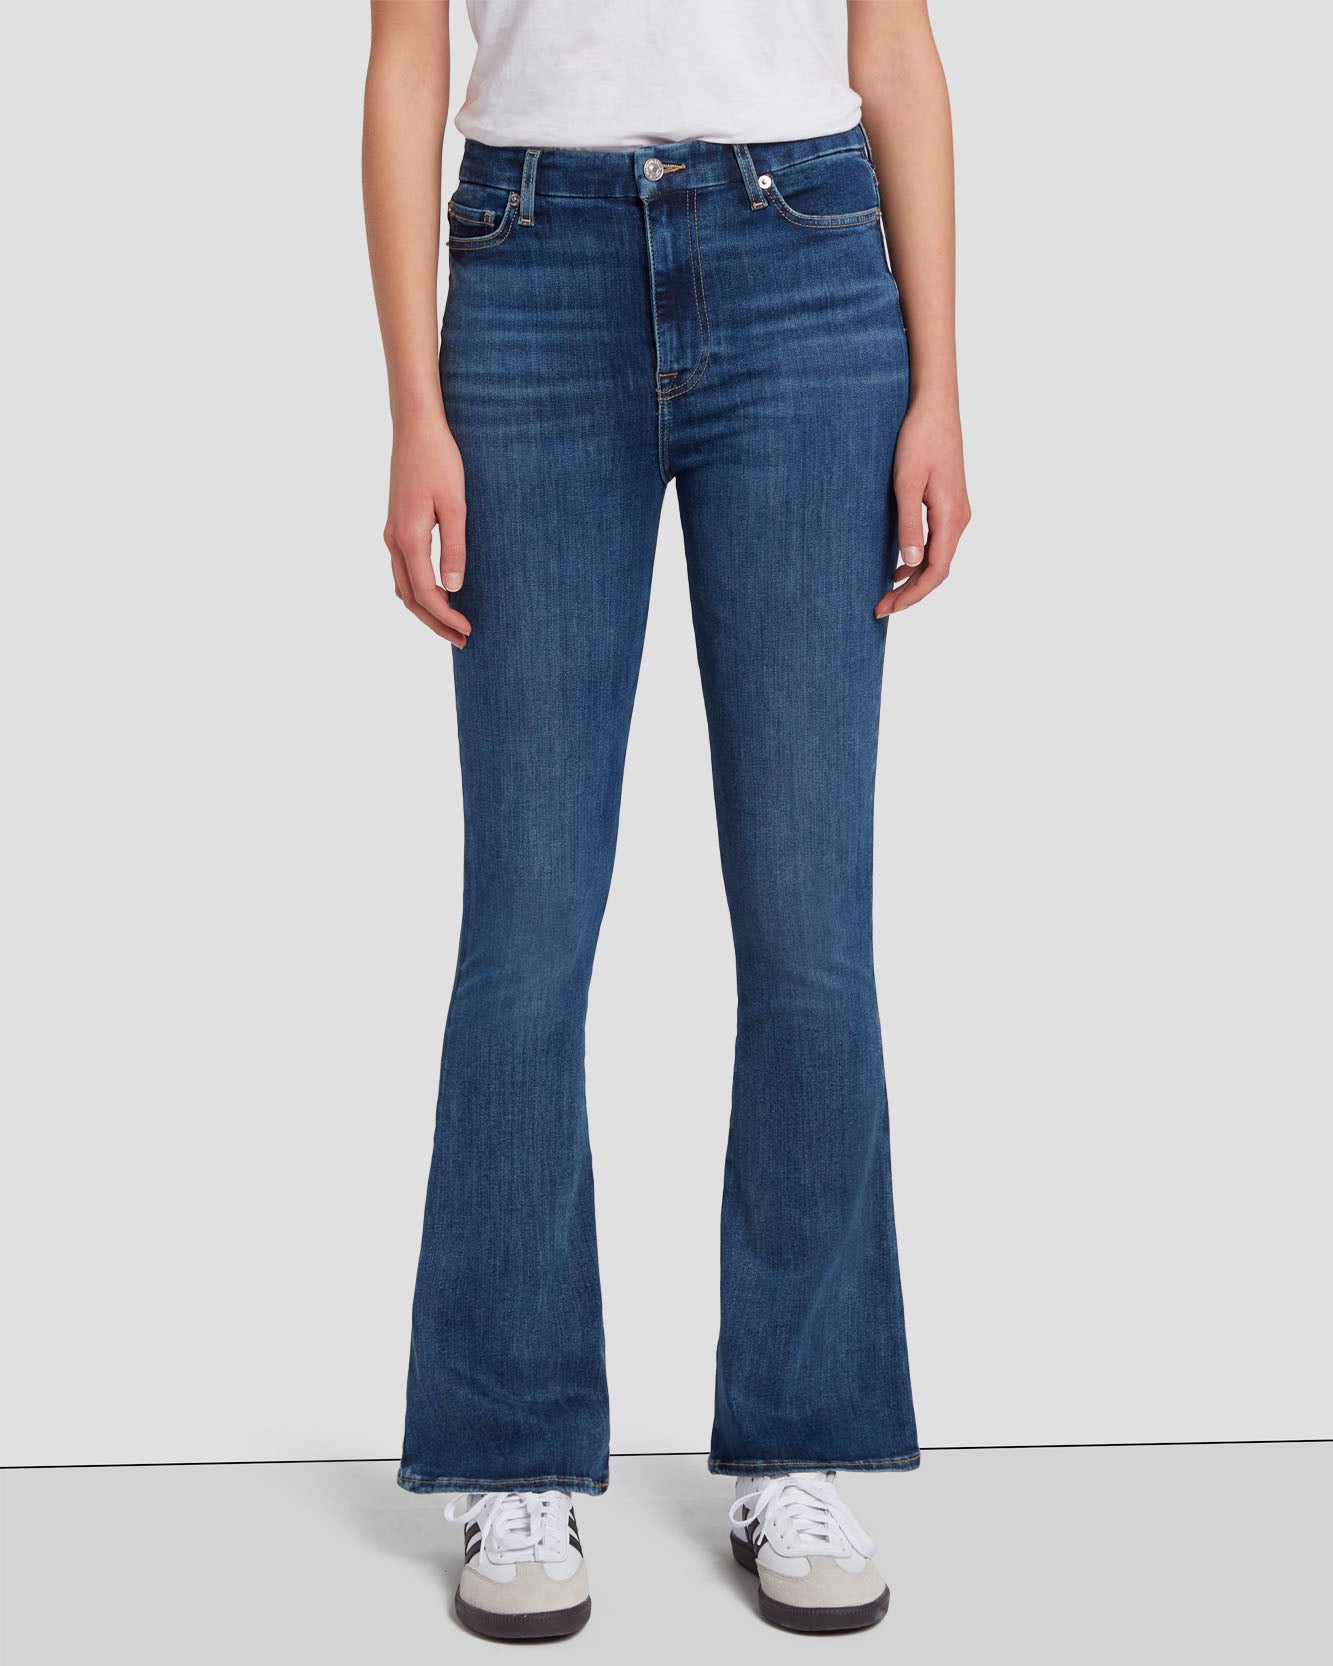 Tailorless No Filter UHR Skinny Boot in Blue Star | 7 For All Mankind